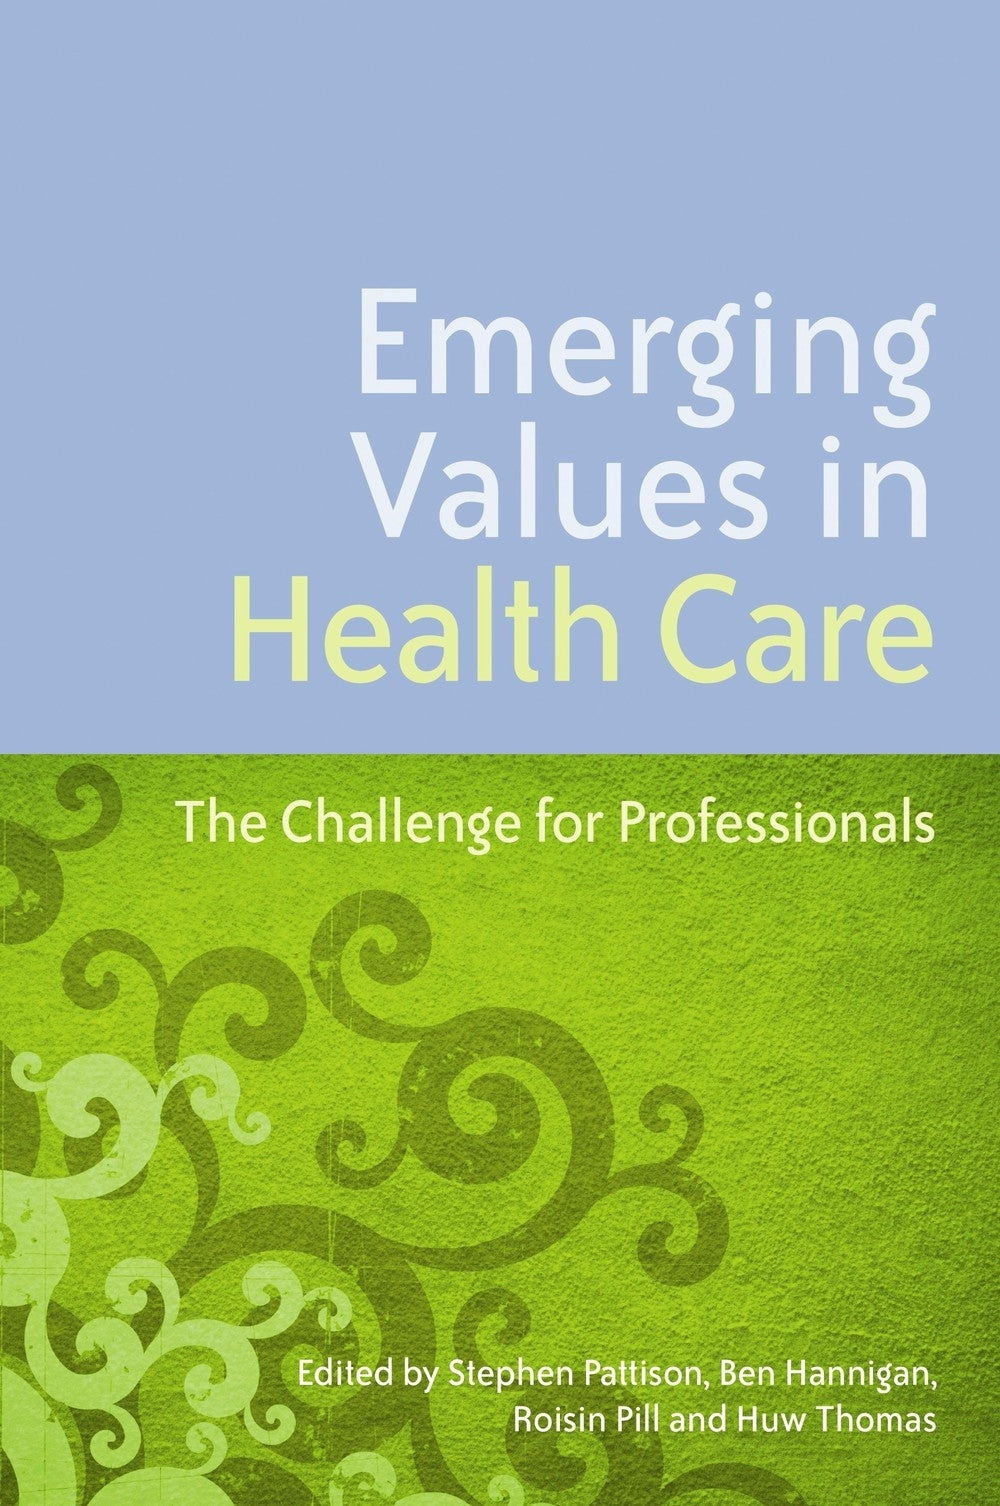 Emerging Values in Health Care by No Author Listed, Stephen Pattison, Huw Thomas, Roisin Pill, Ben Hannigan